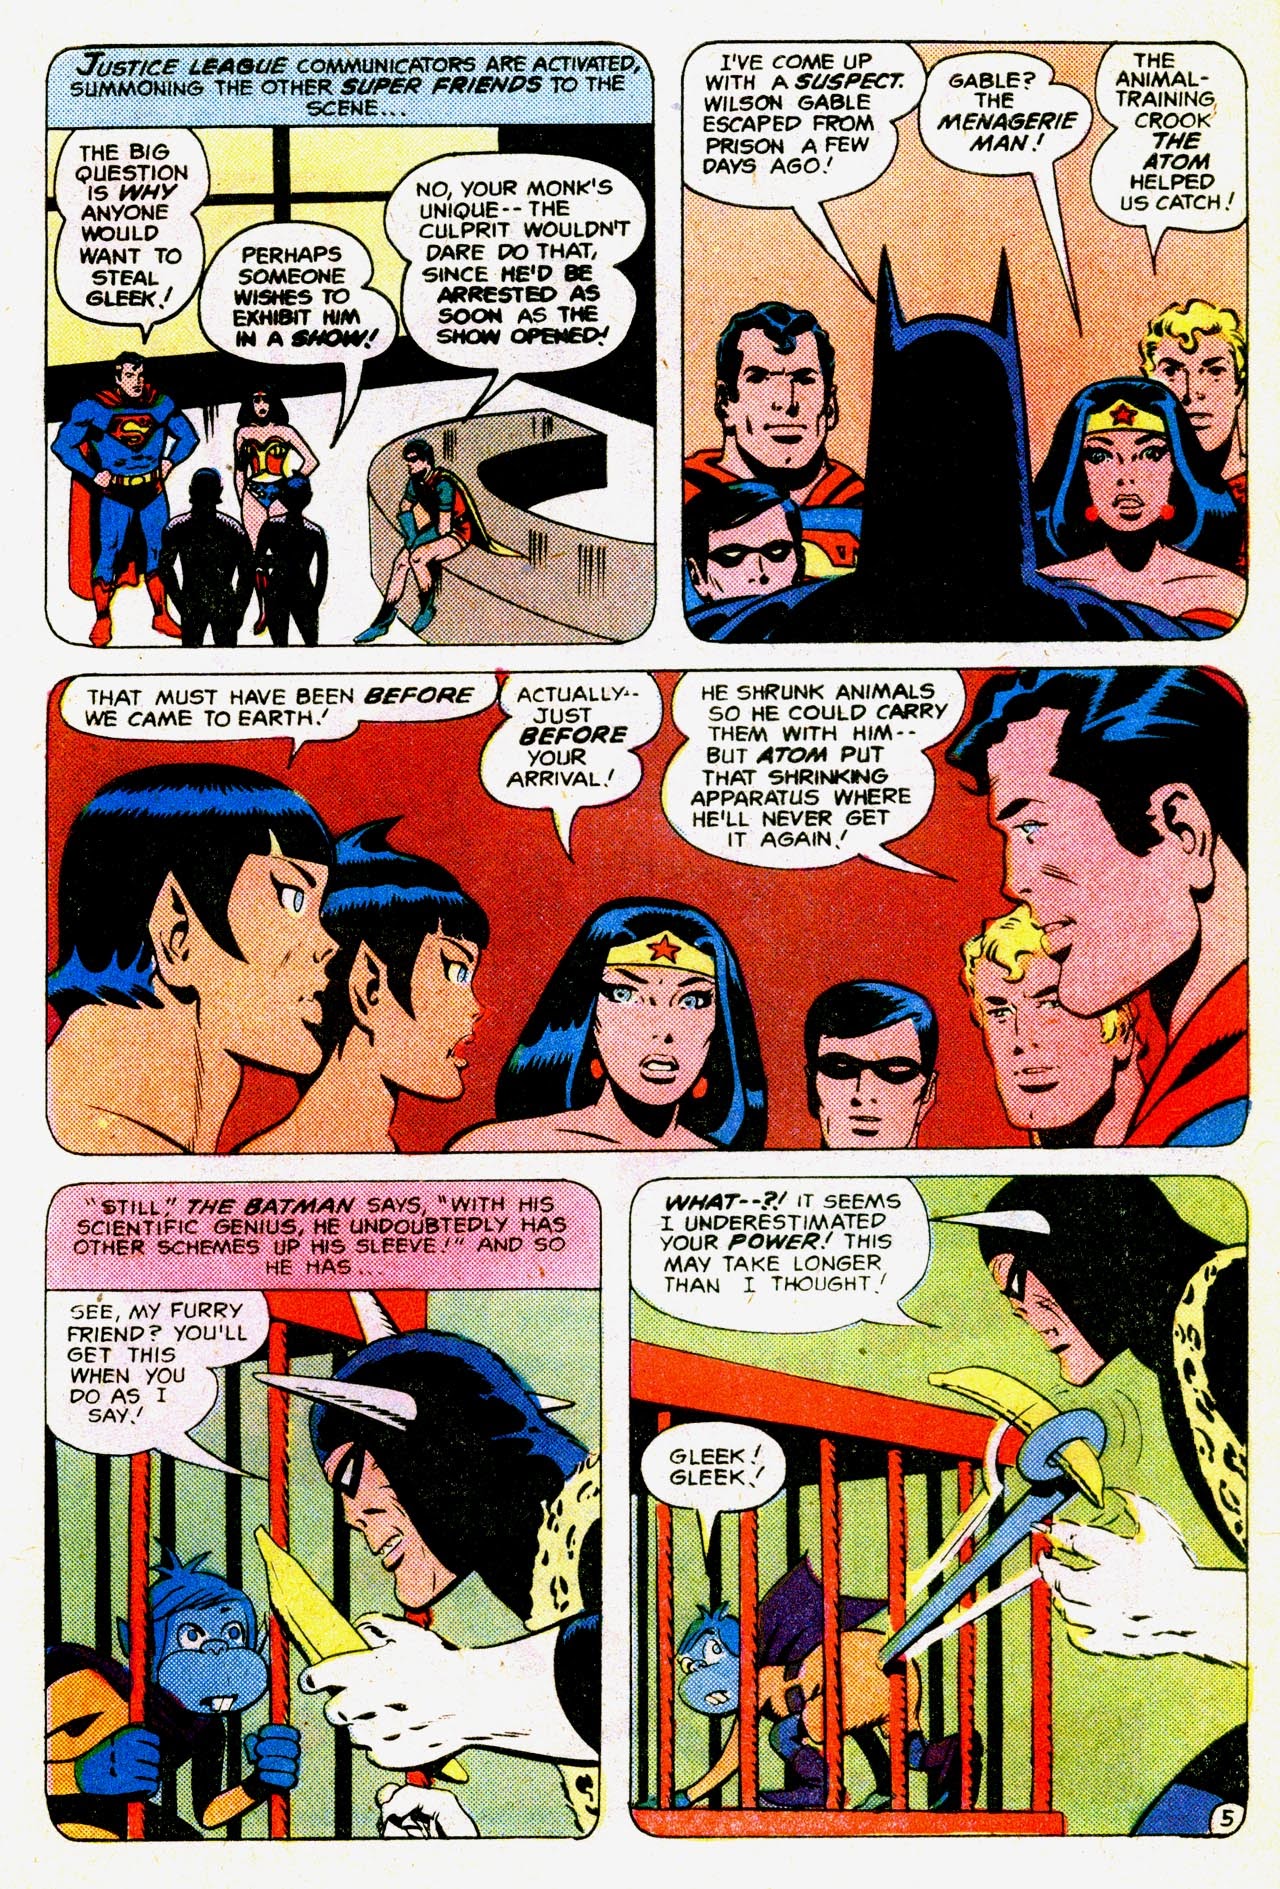 Read online Super Friends Special comic -  Issue # Full - 7